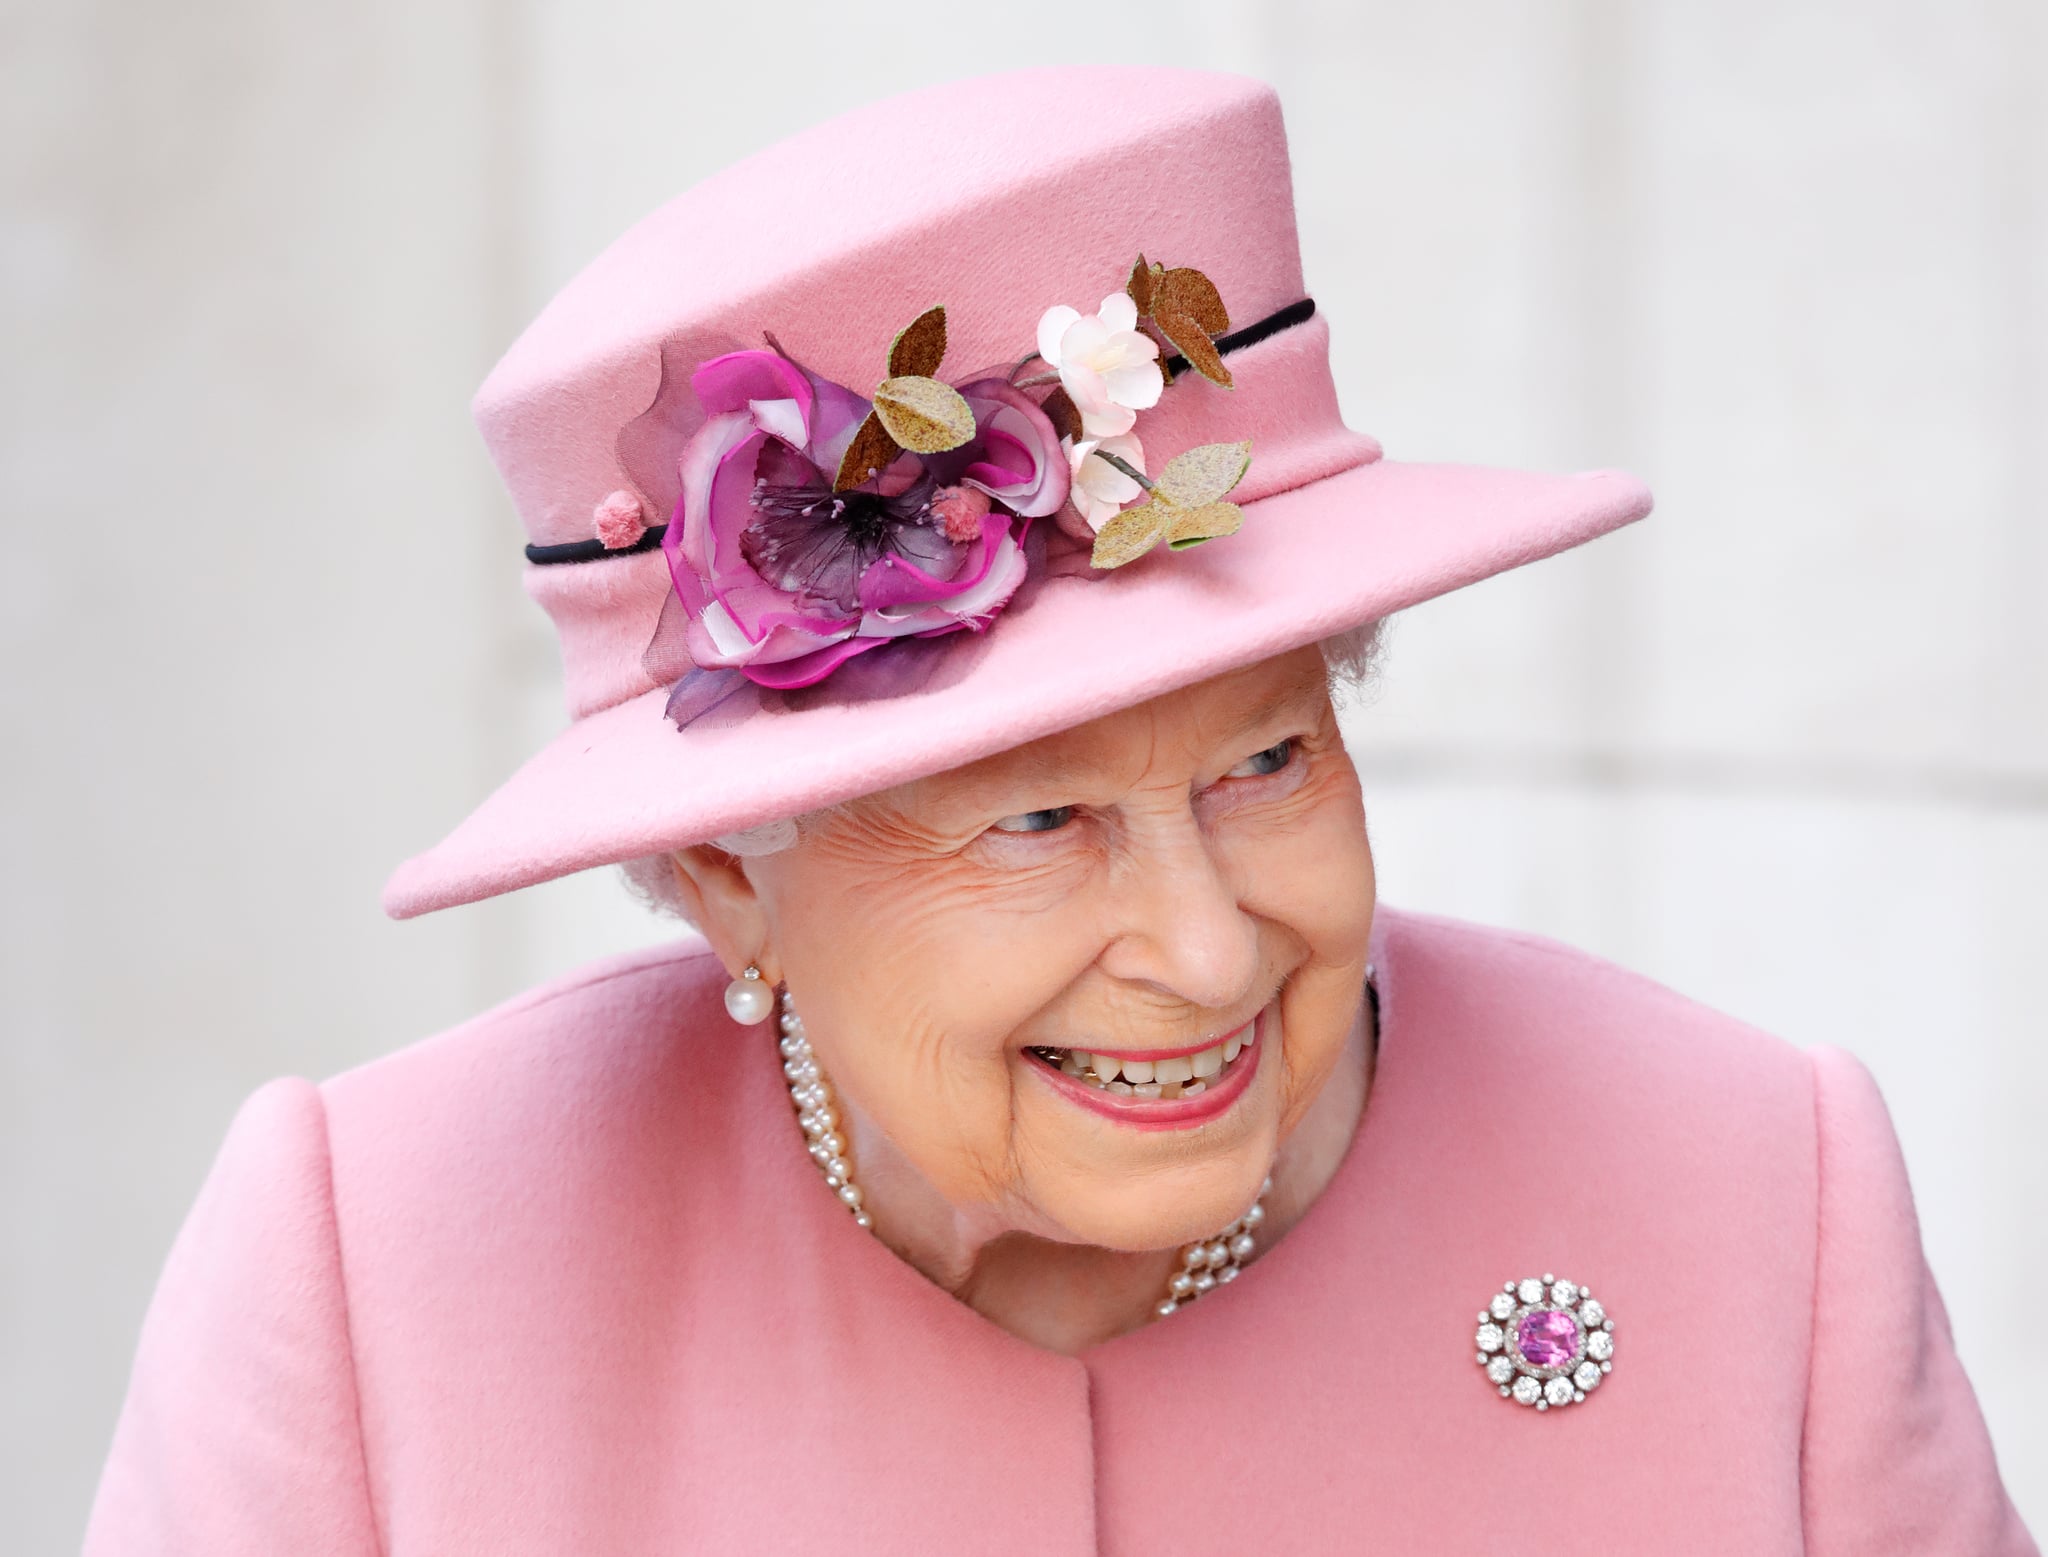 LONDON, UNITED KINGDOM - MARCH 19: (EMBARGOED FOR PUBLICATION IN UK NEWSPAPERS UNTIL 24 HOURS AFTER CREATE DATE AND TIME) Queen Elizabeth II visits King